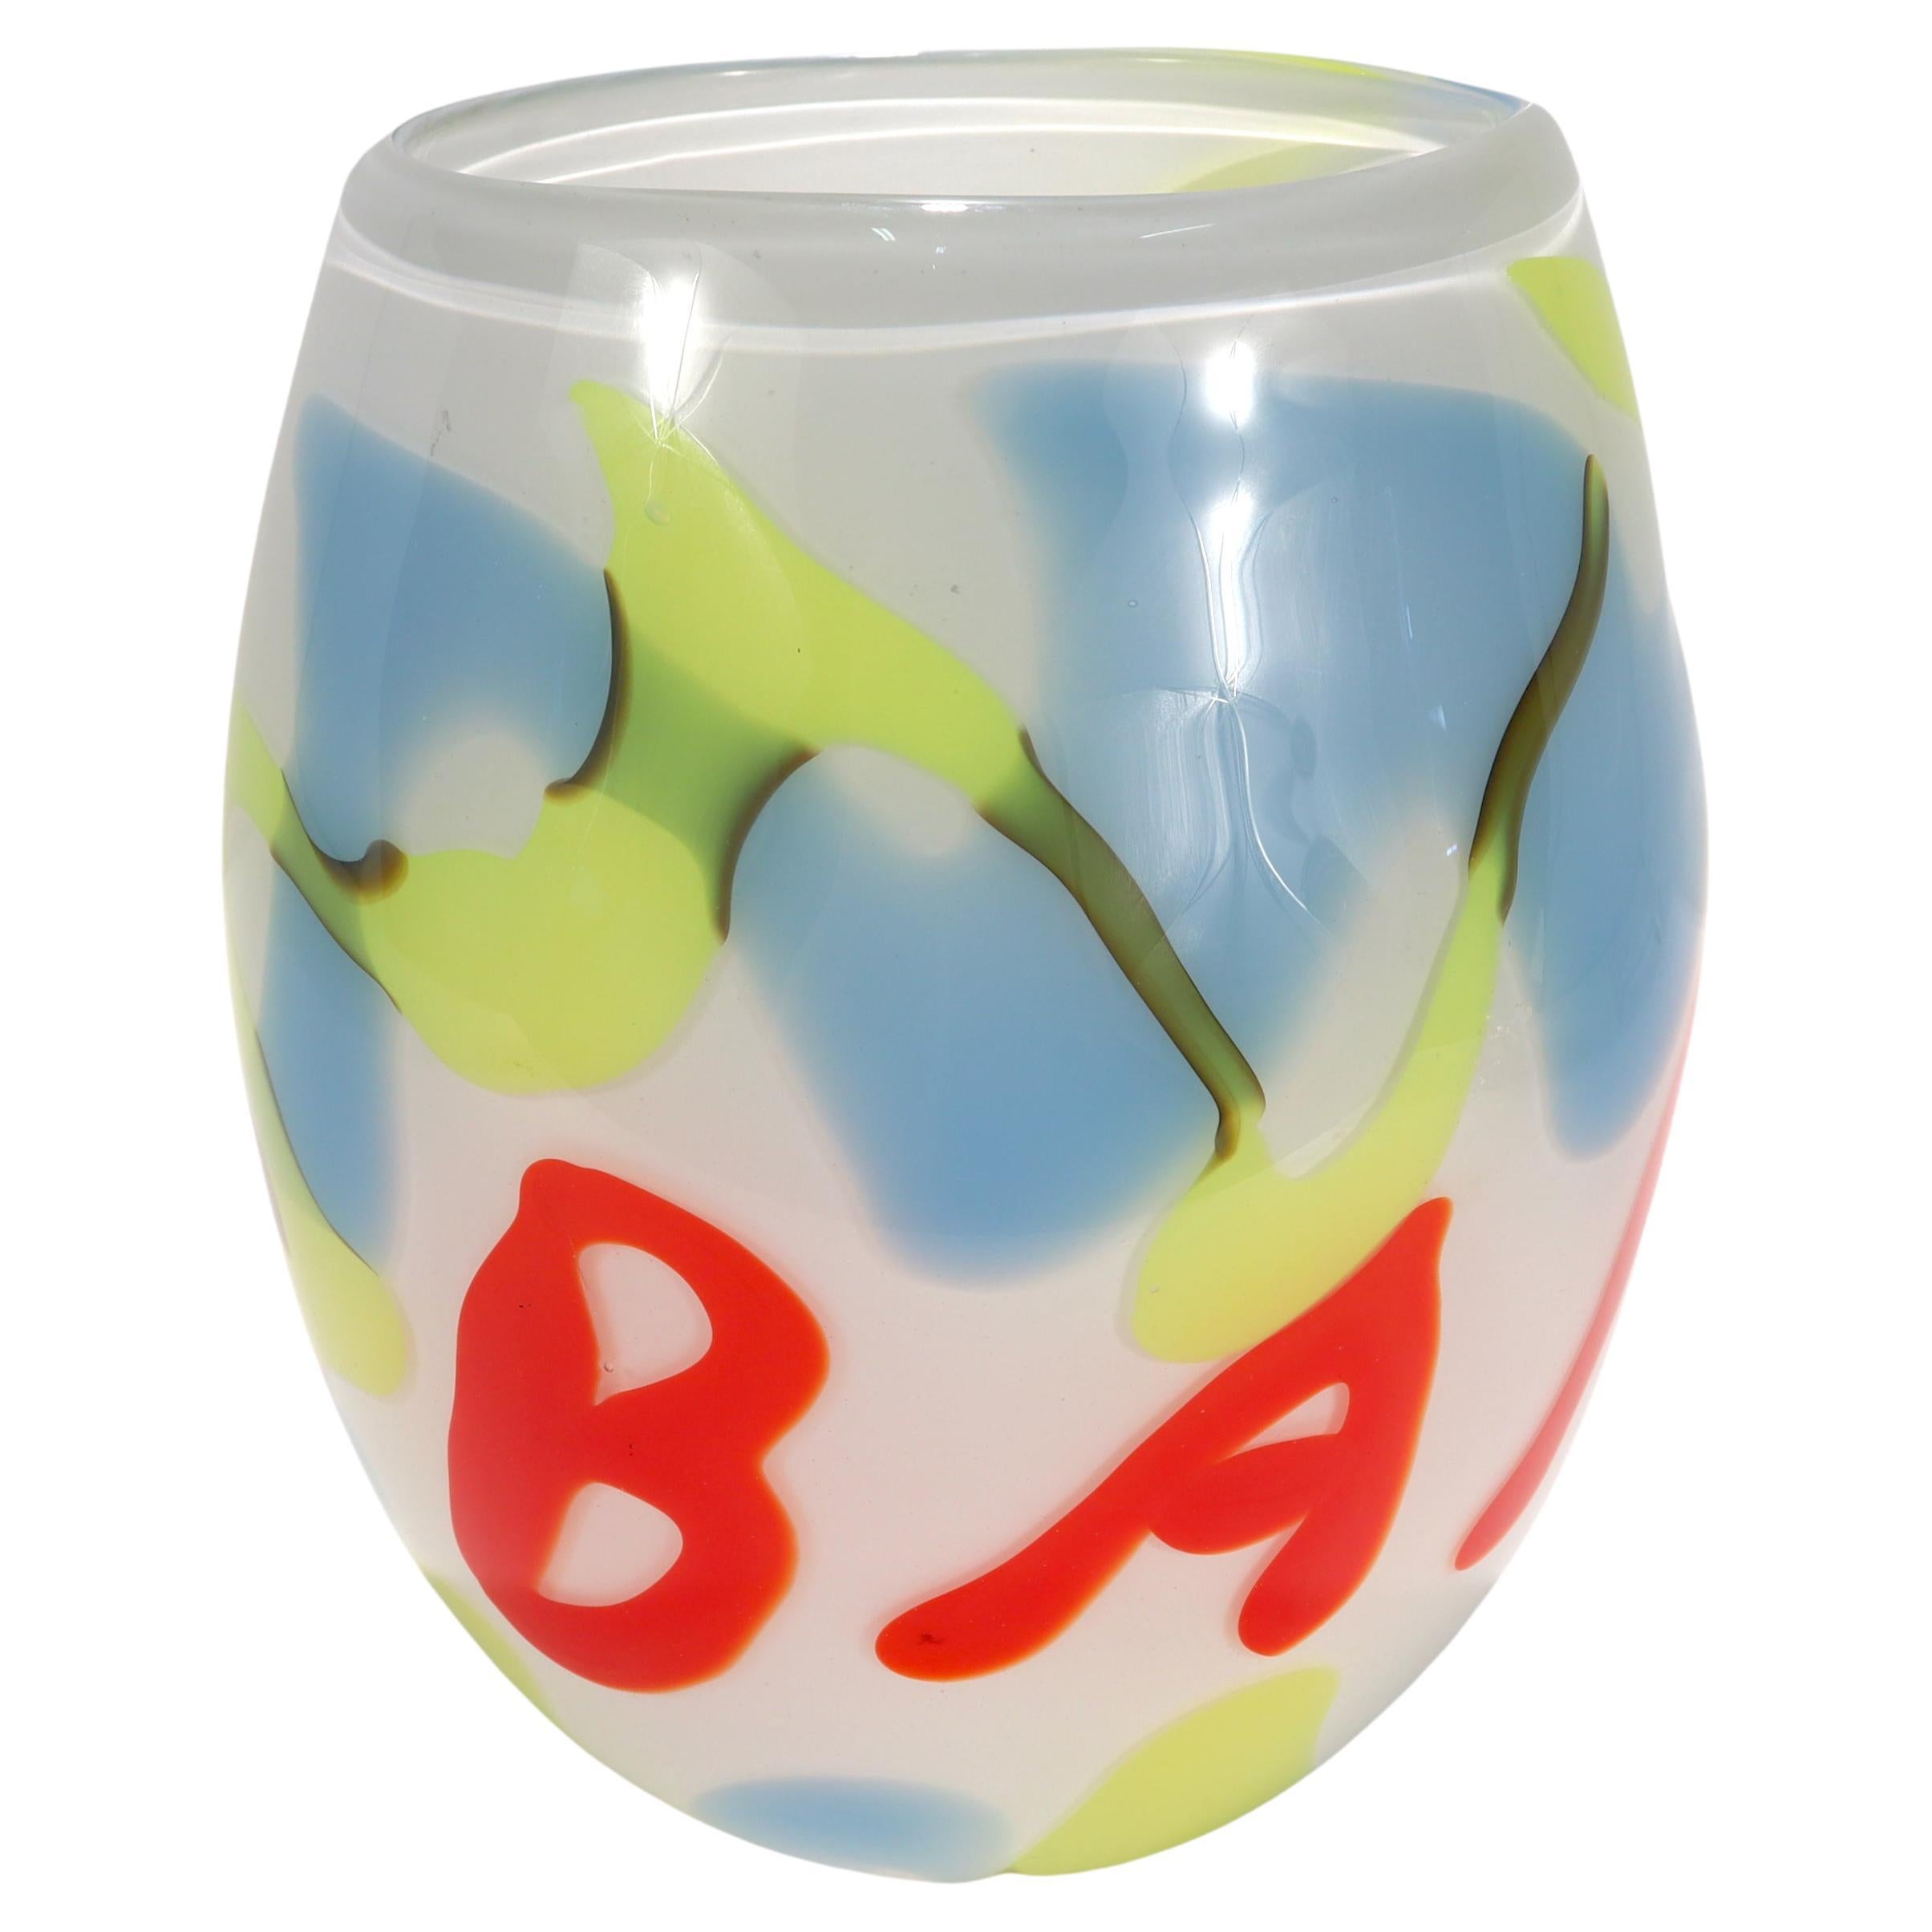 "BANG" Pop-Art Cased Art Glass Vase in White, Blue, Yellow, & Red, 20th Century For Sale